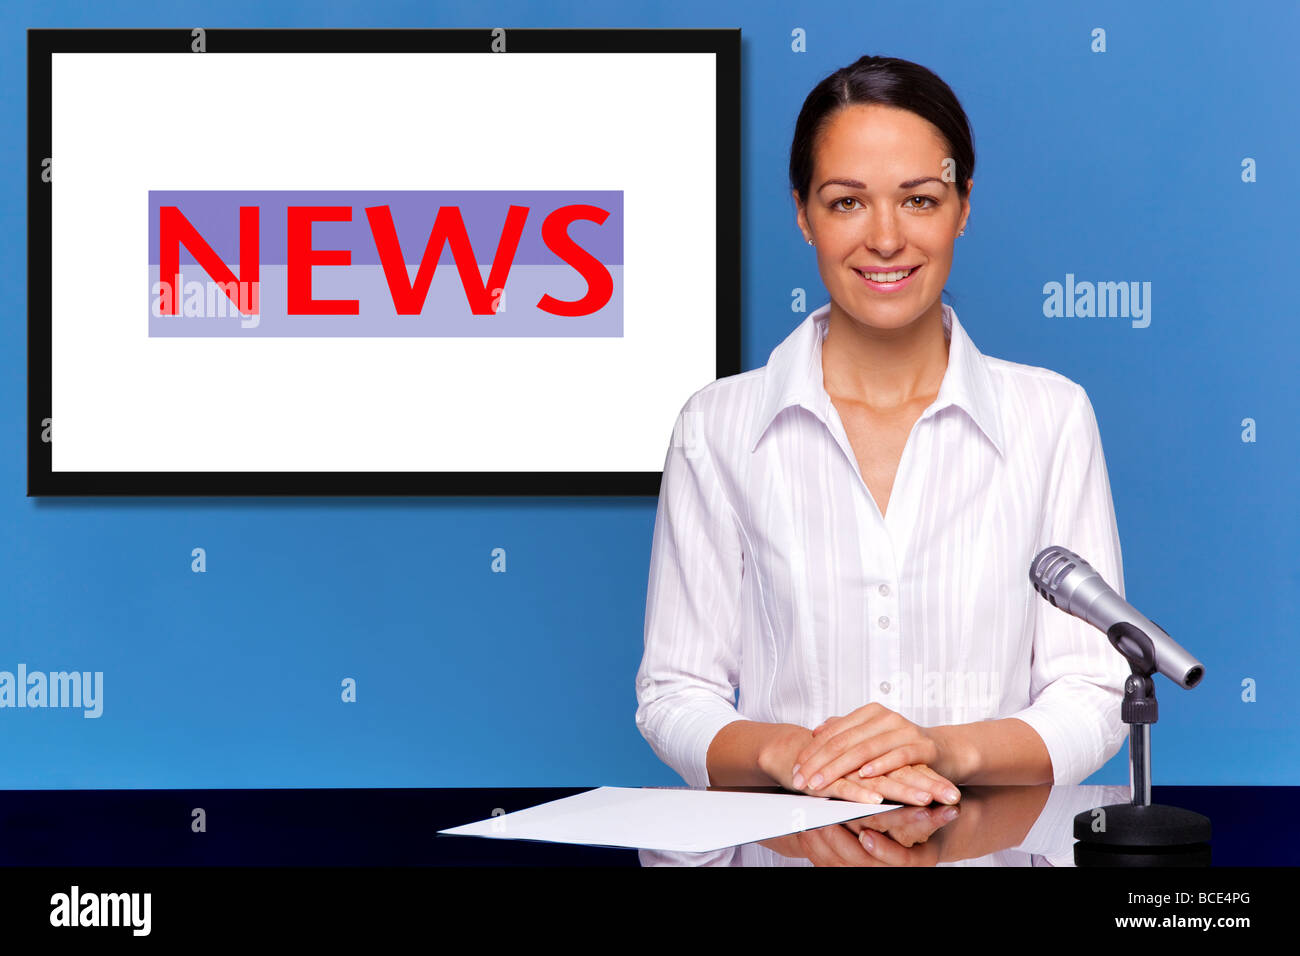 A female newsreader presenting the news add your own text or image to the screen behind her Stock Photo